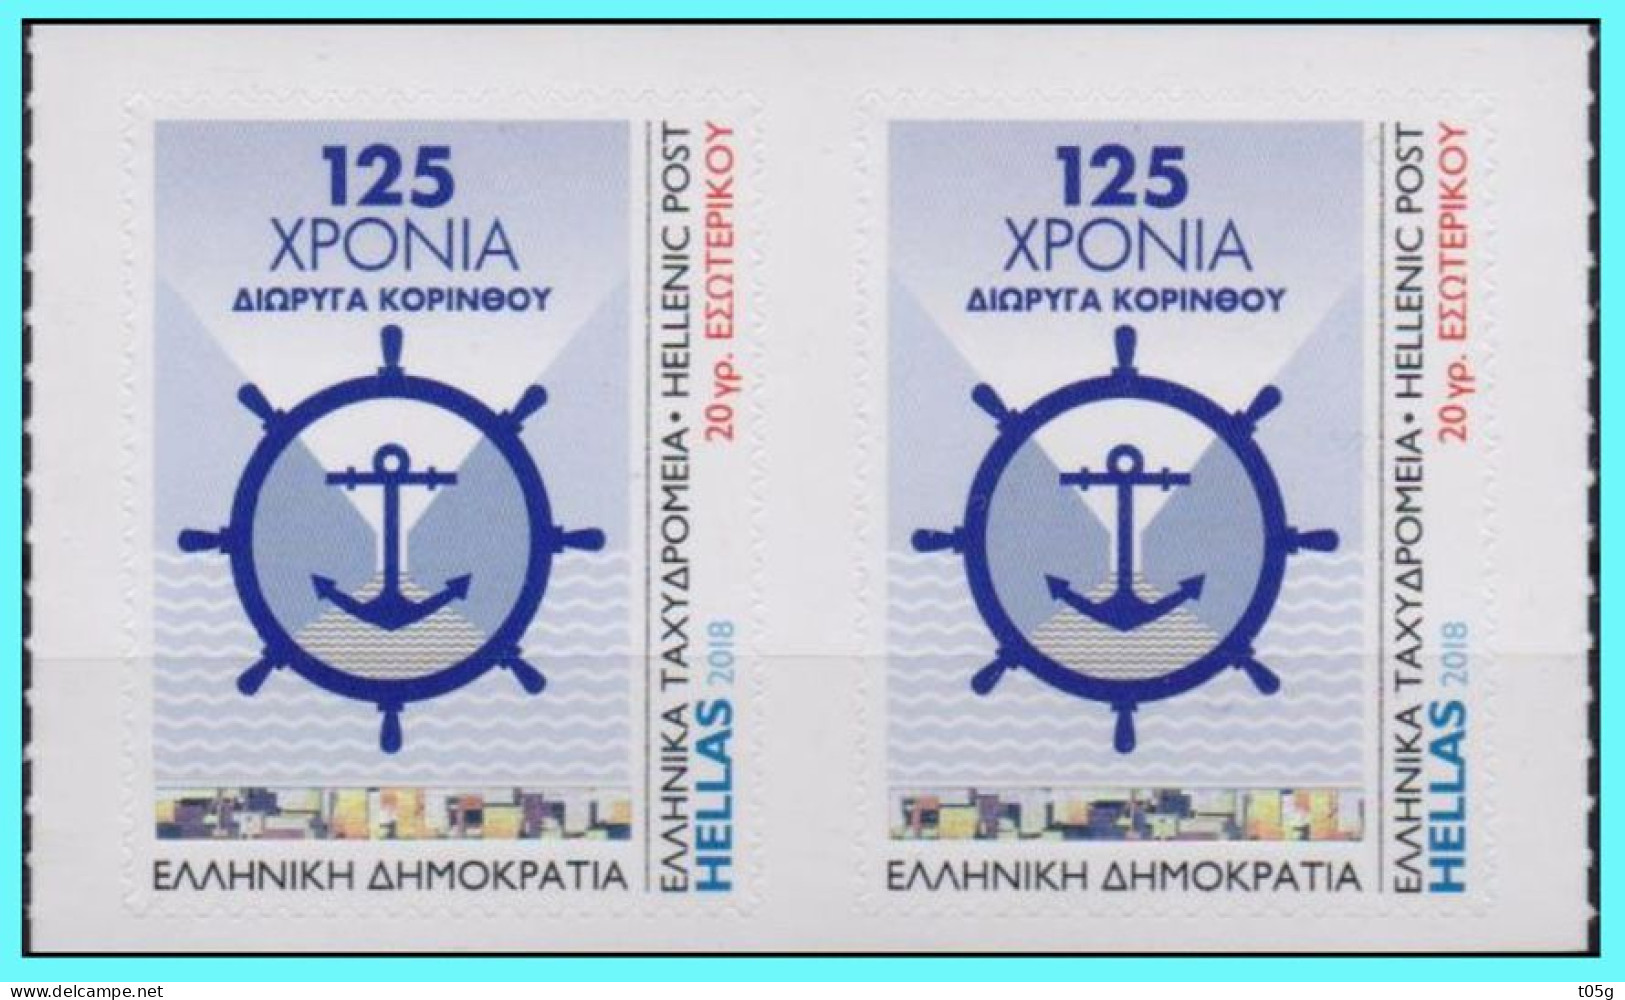 GREECE- GRECE  - HELLAS  2018: 125 YEARS OF THE KORINTH CANAL- Two Self-athesive Stamps From Booklet  MNH** - Ungebraucht